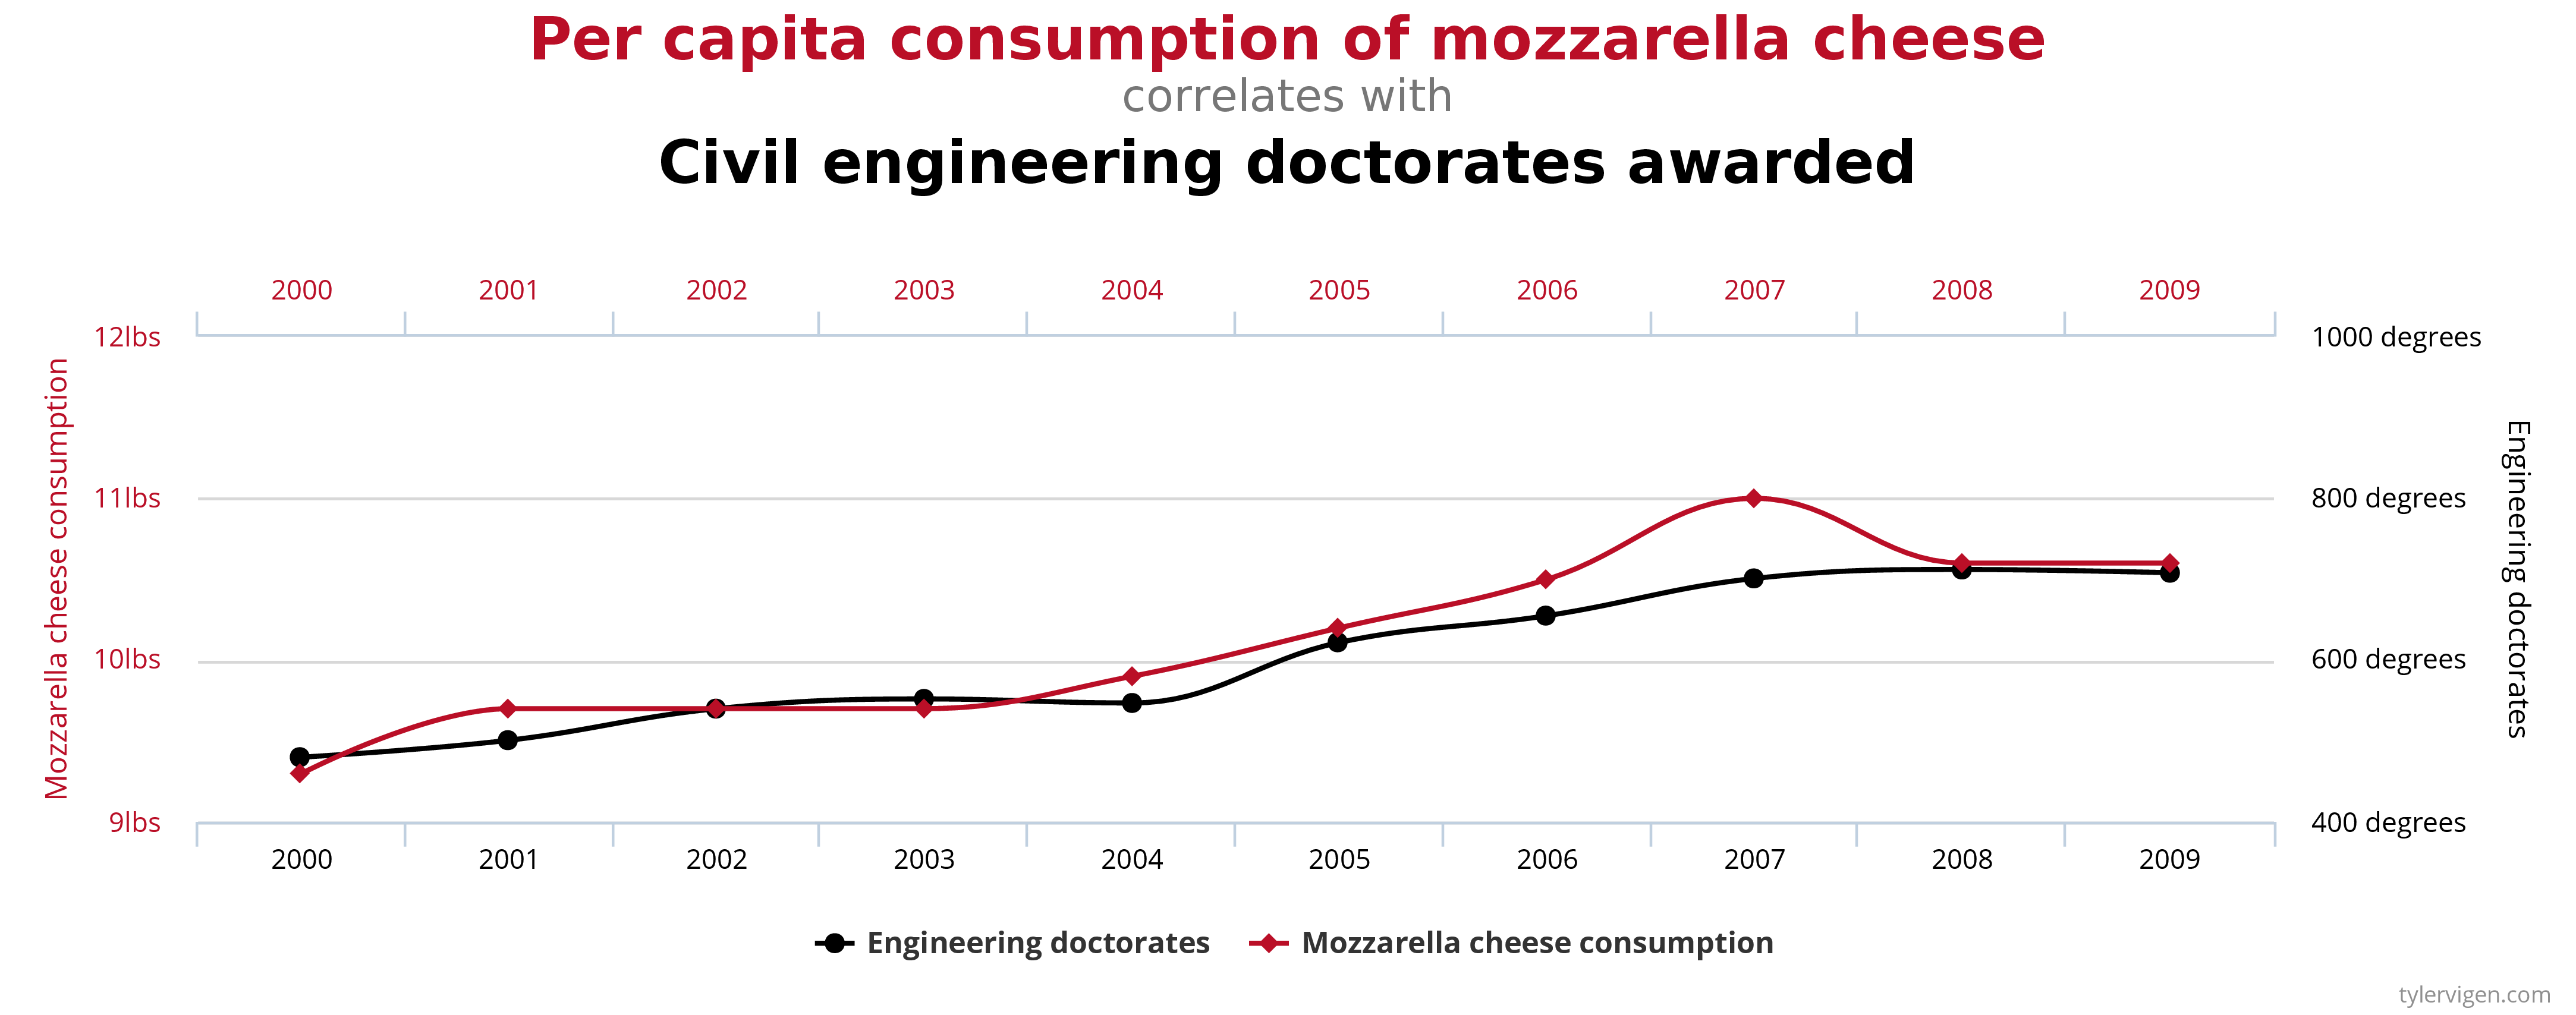 A chart showing the correlation between per capita consumption of mozzarella cheese, and the number of civil engineering doctorates awarded.